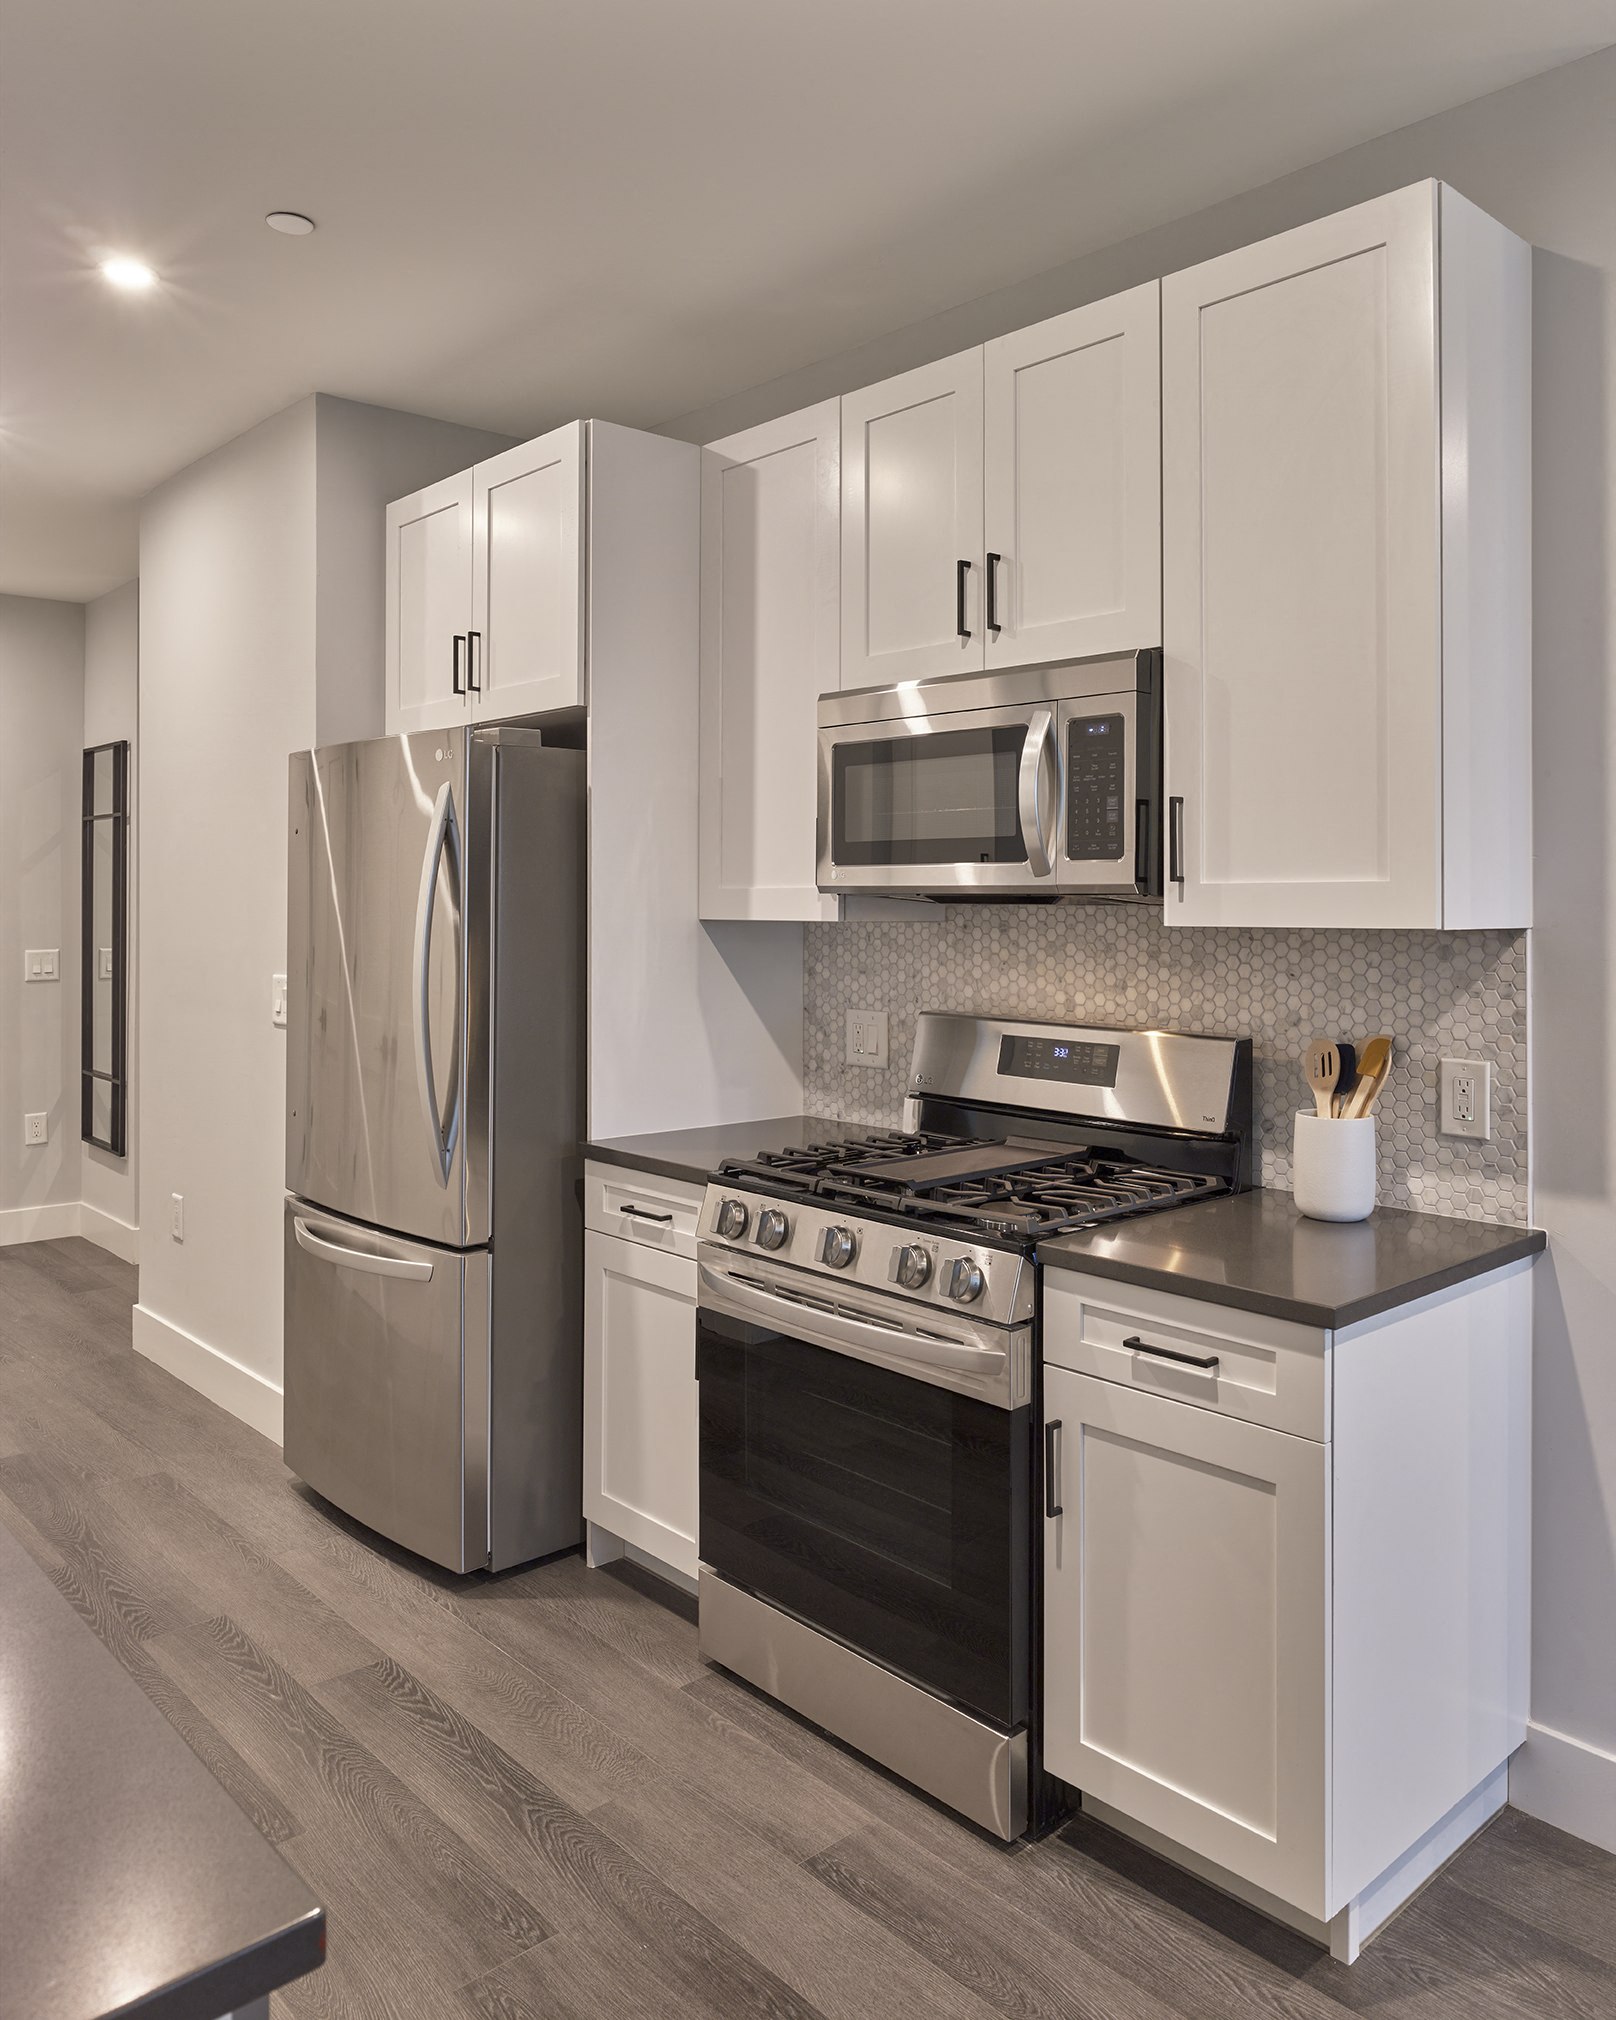 full size stainless-steel appliances, quiet close cabinetry, hardwood floors throughout